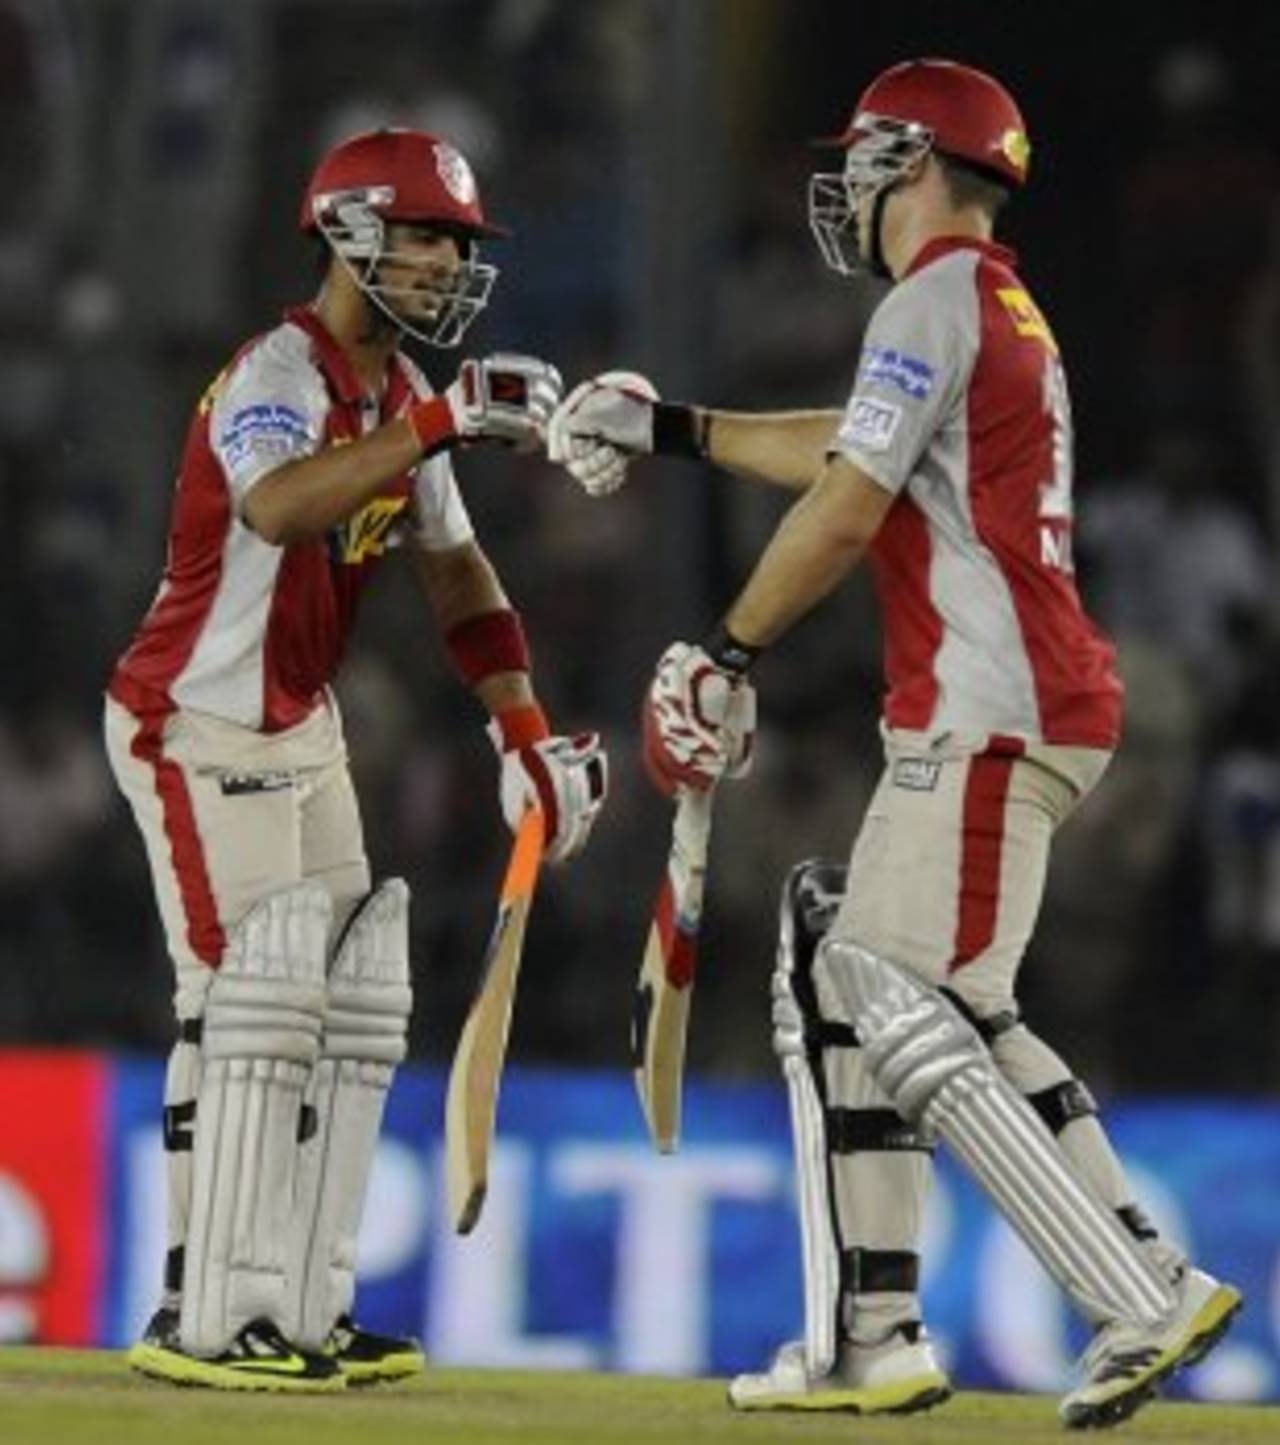 David Miller: "I said to Mandy, we just need to watch the ball well"&nbsp;&nbsp;&bull;&nbsp;&nbsp;BCCI